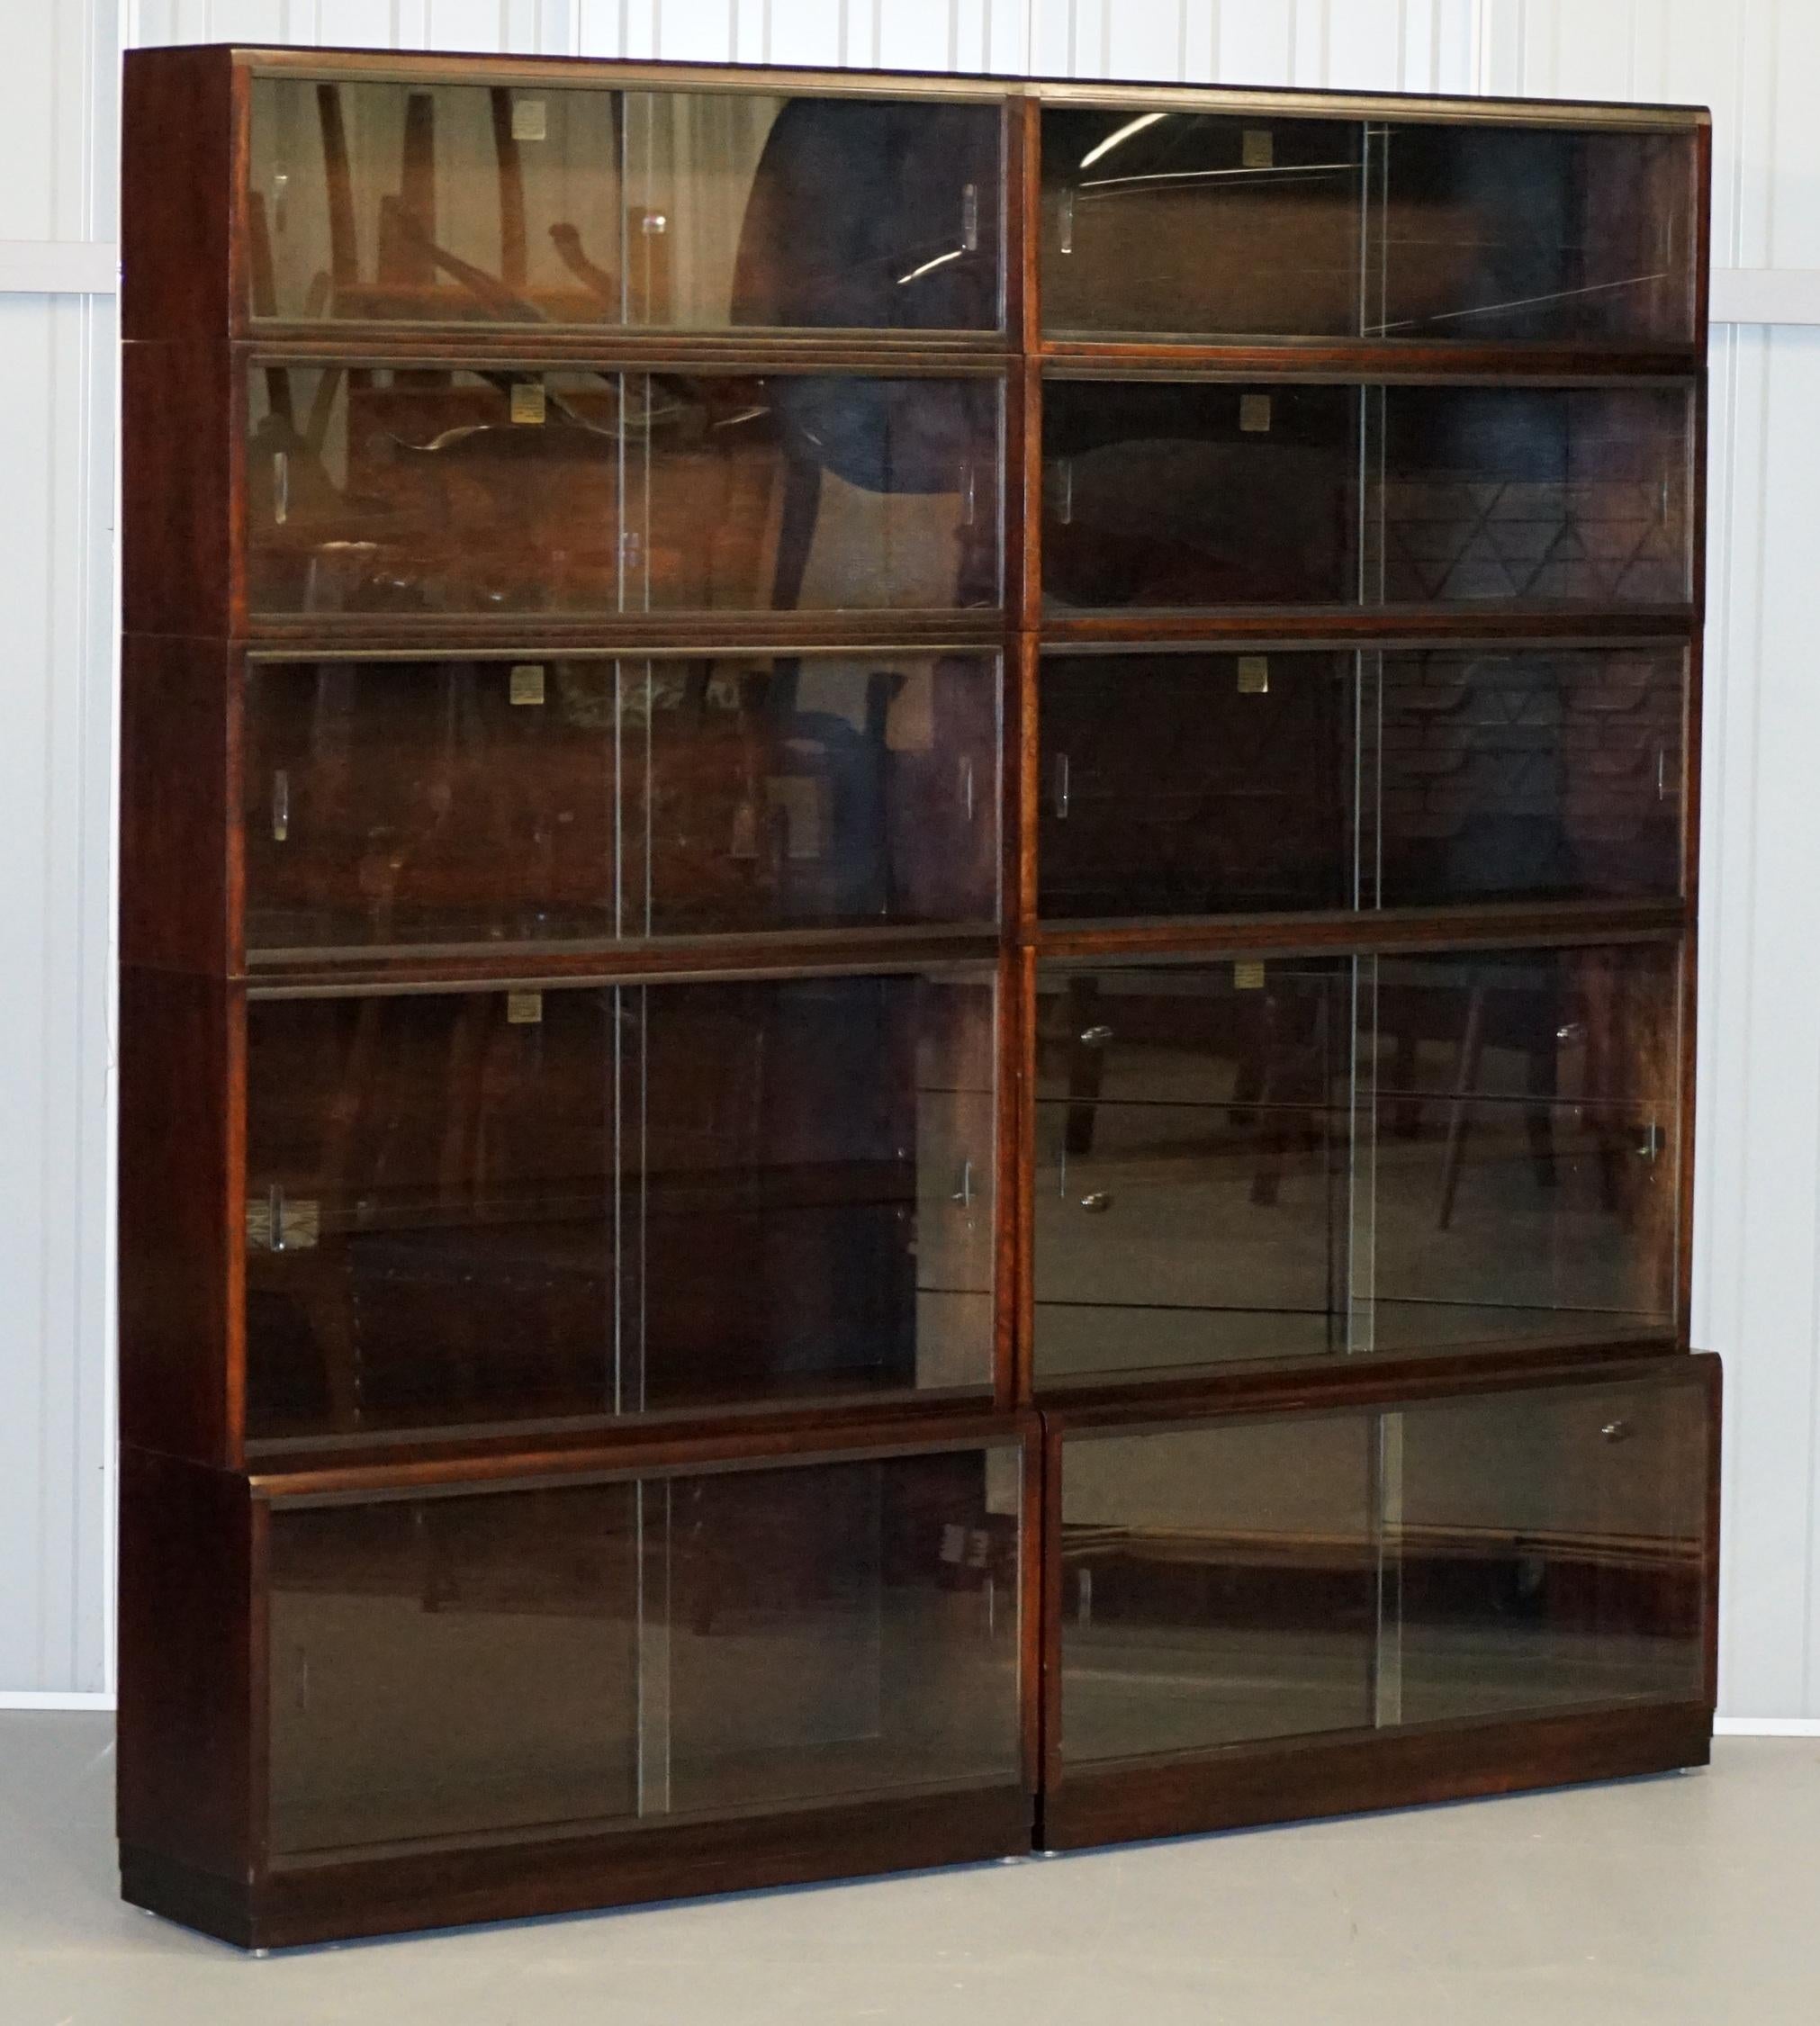 We are delighted to offer for sale this stunning pair of Simplex modular legal library stacking bookcases

A very good looking well made and decorative pair of legal library stacking bookcases. These are modular which means each piece can be